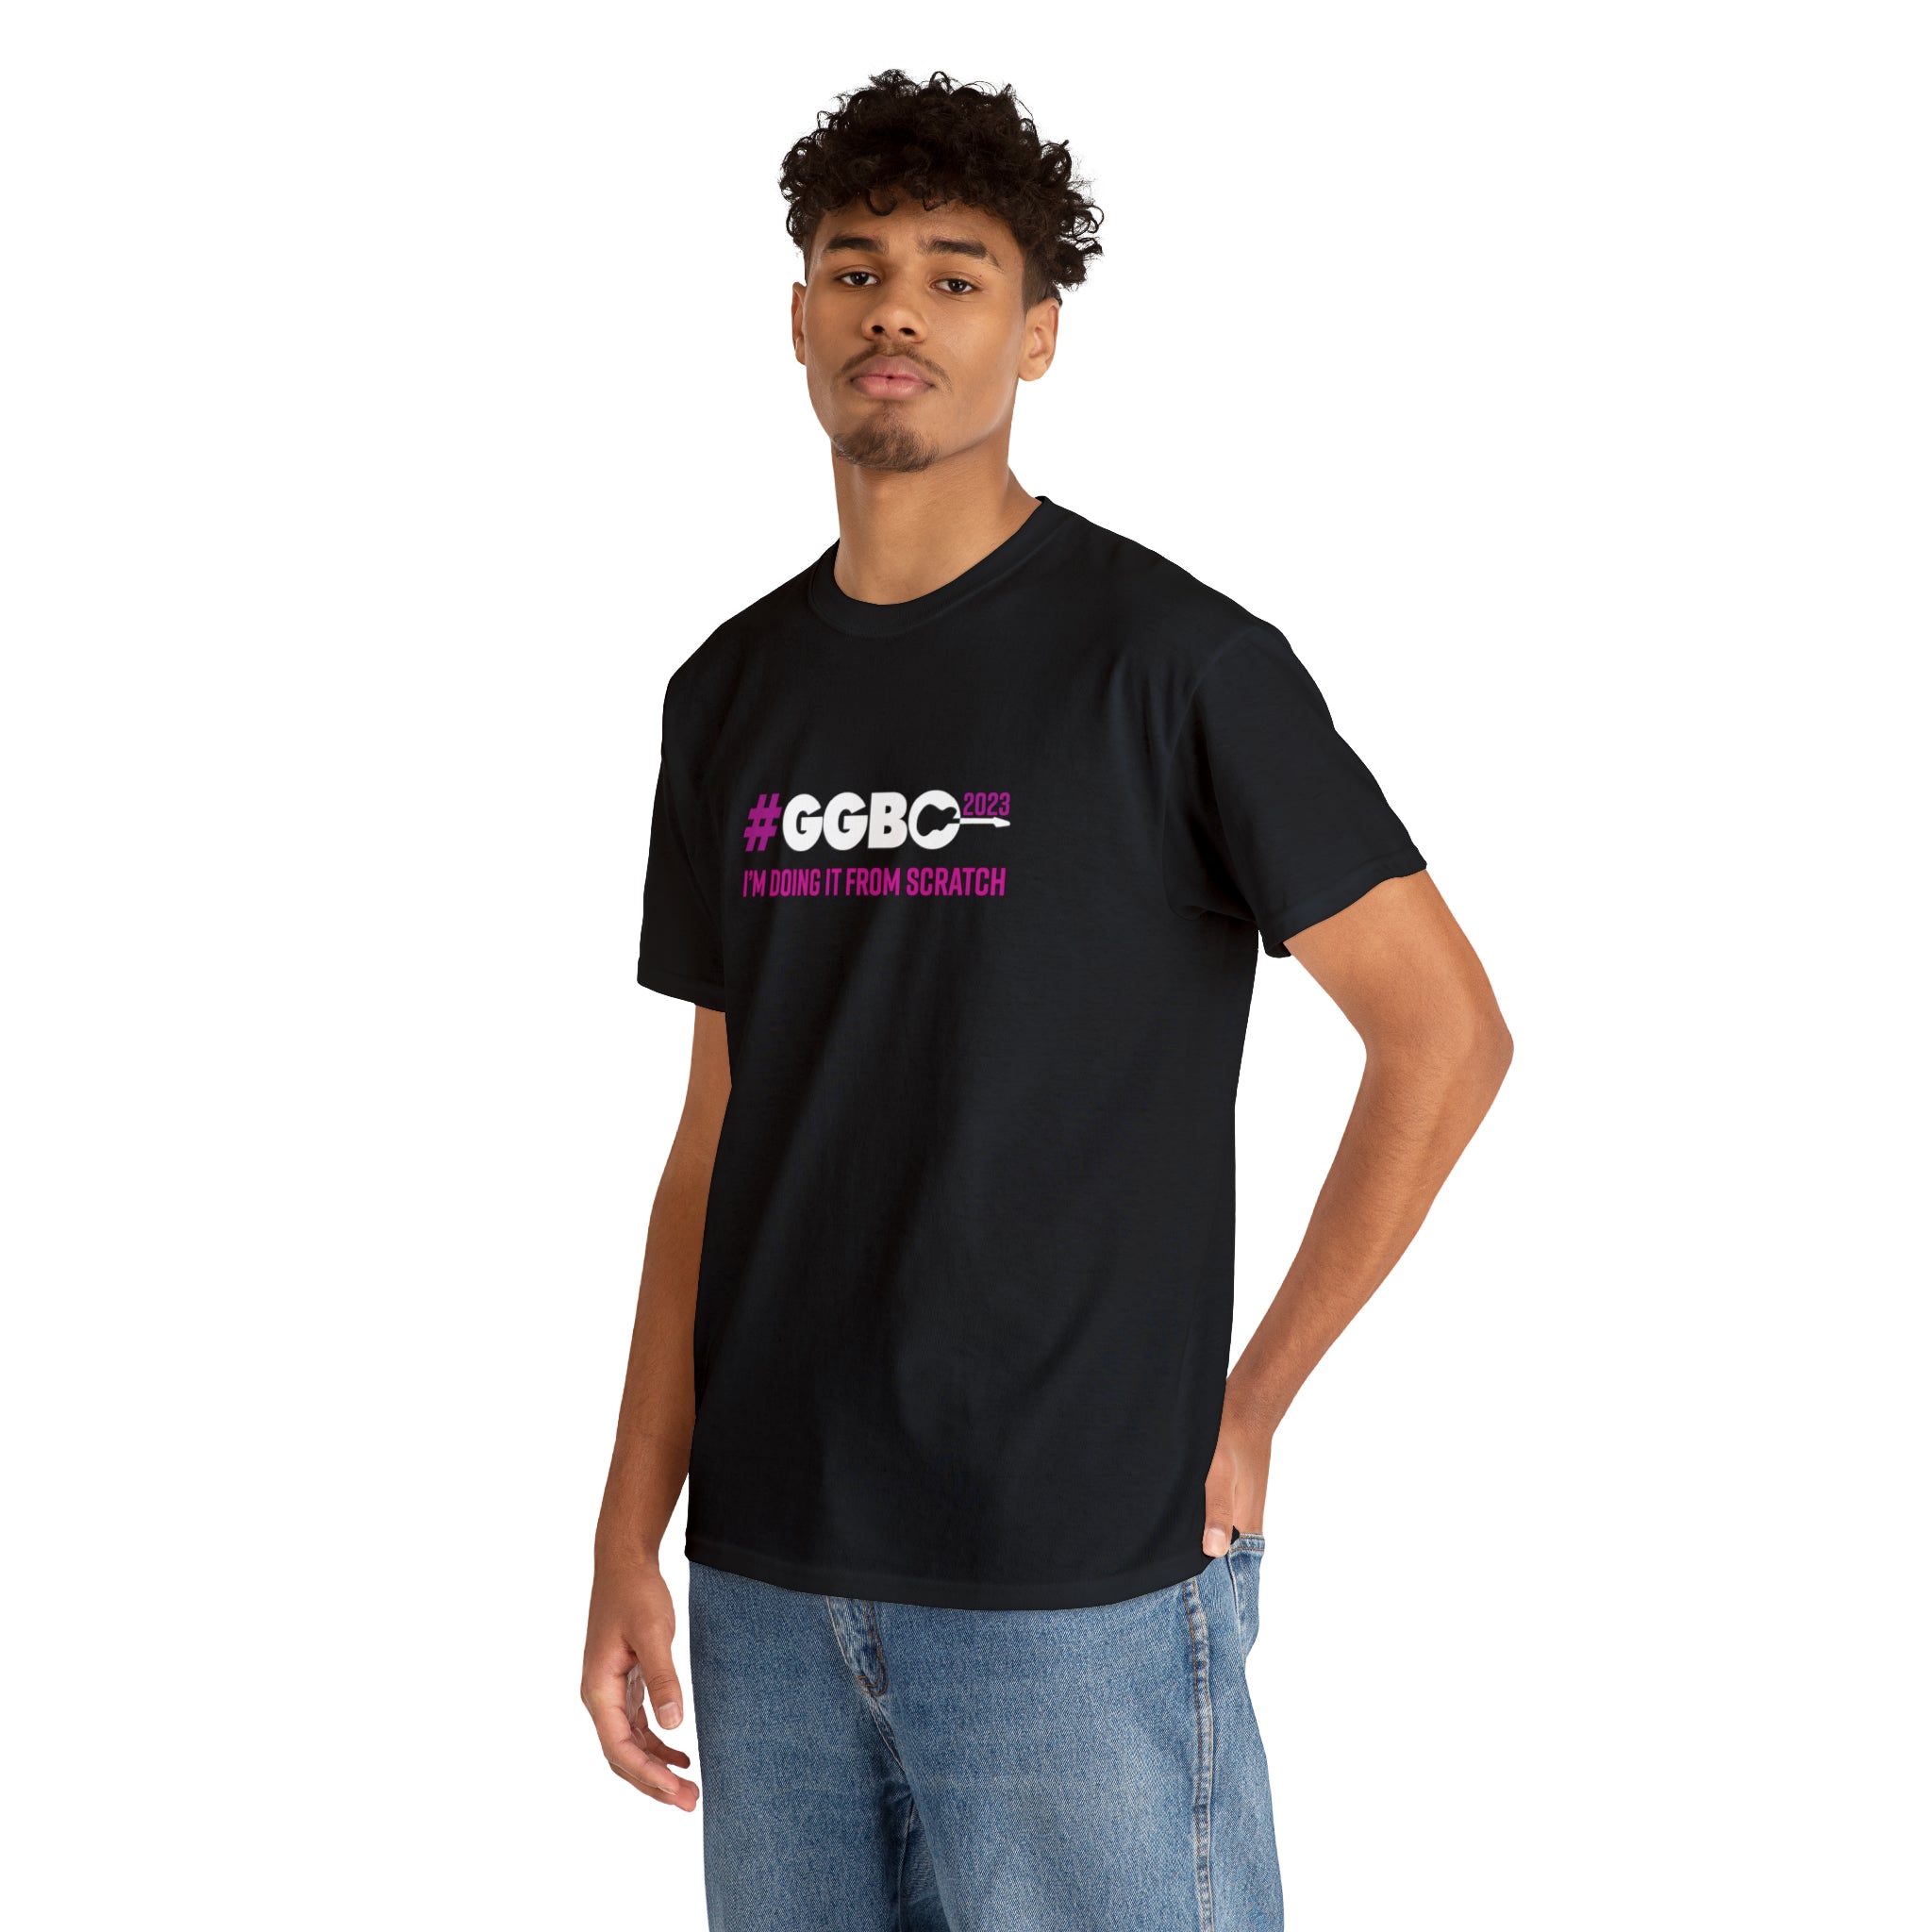 I'm doing it from Scratch Black t-shirt